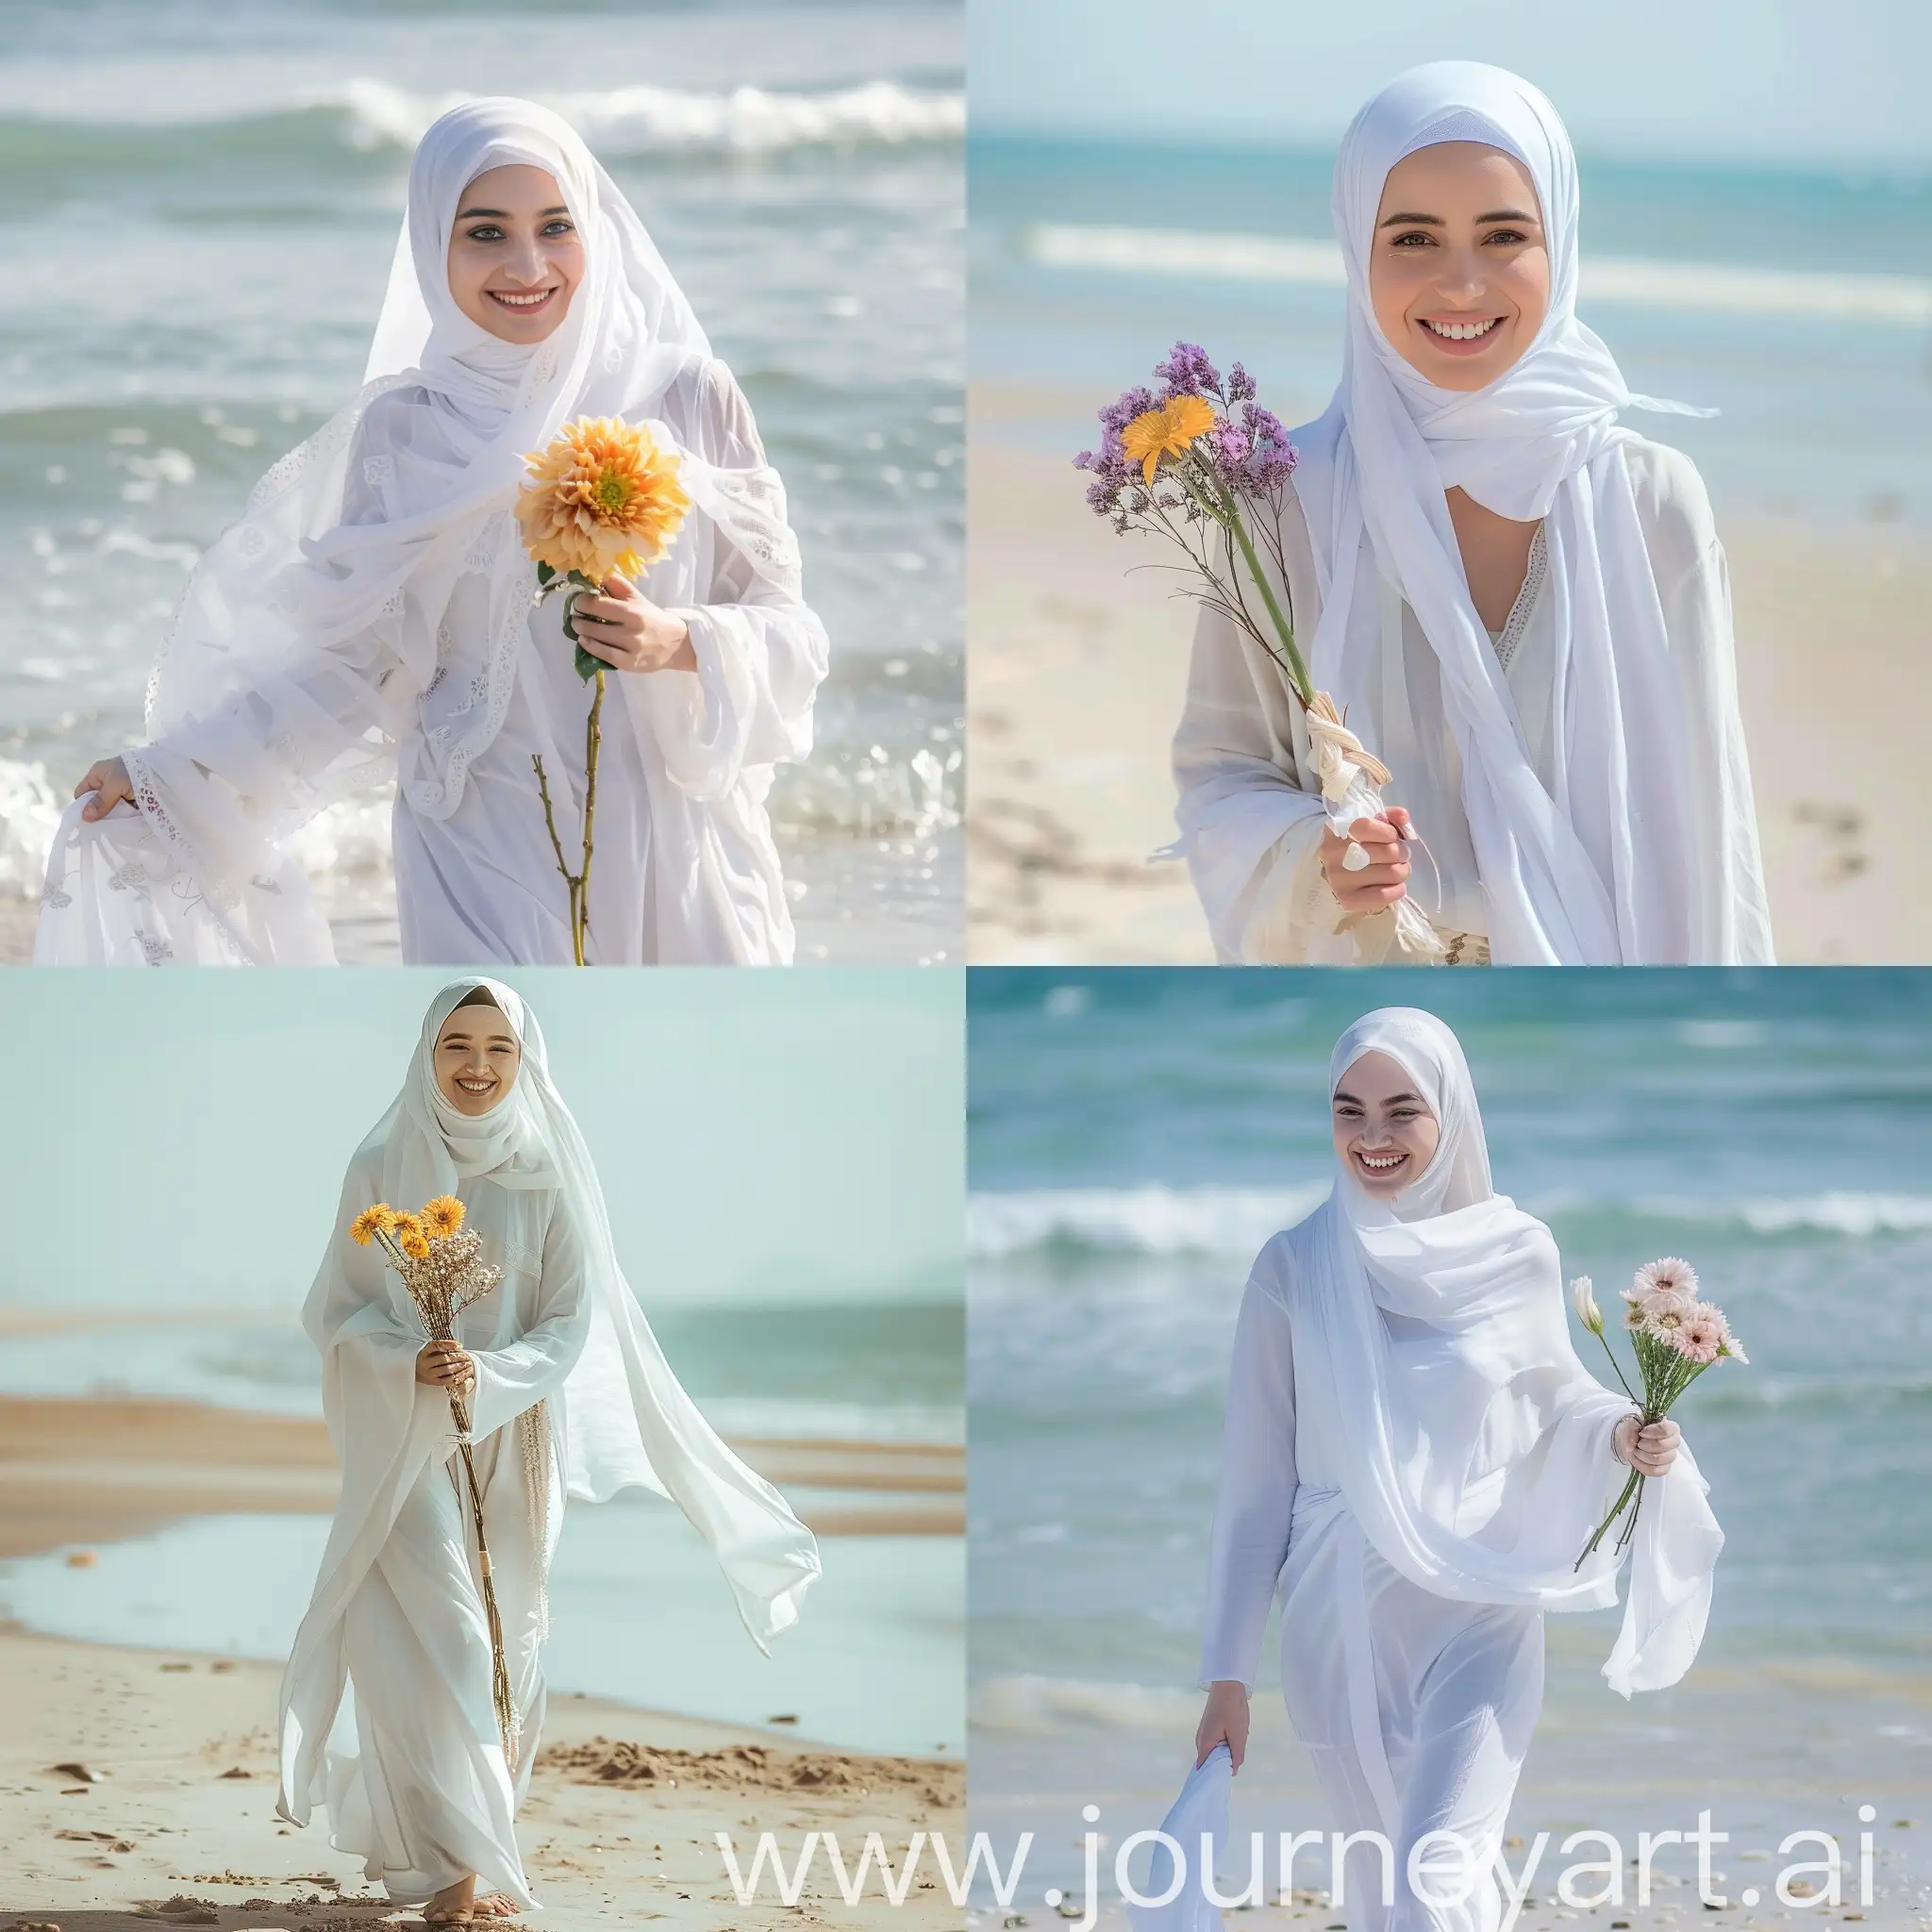 A beautiful muslim women holding flower walk through the beach with smile on her face wearing white clothes